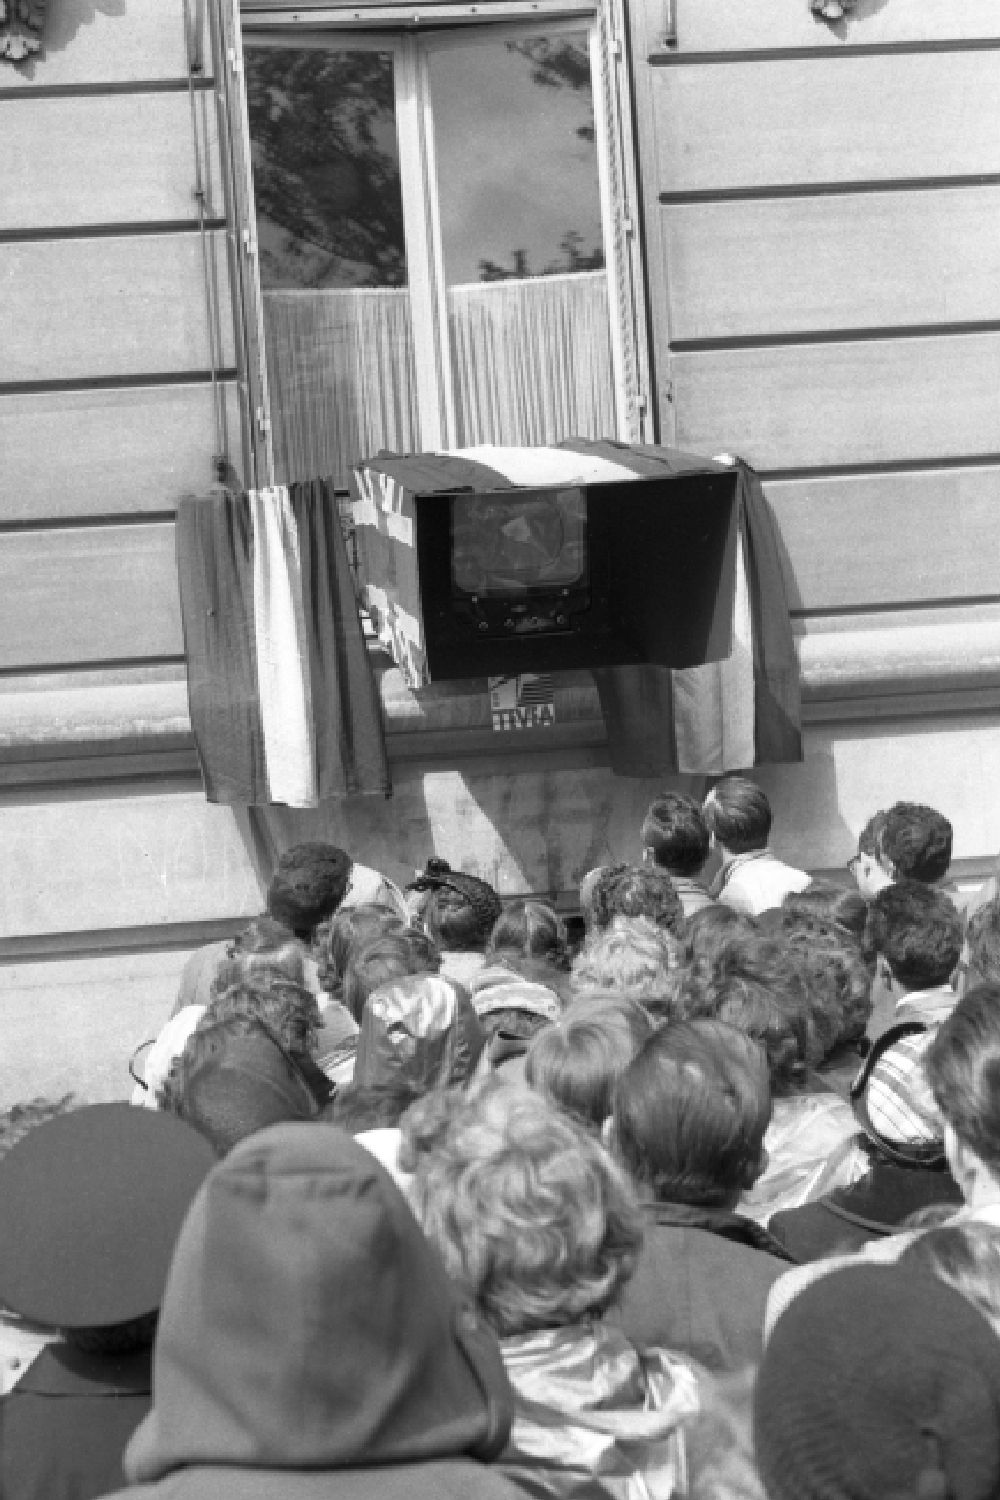 <p>                     Reportedly, a whopping 27 million people in the UK watched the ceremony on television and 11 million listened on the radio, with even more viewers across the globe. This photograph depicts a crowd in France gathering together to watch the coronation ceremony on a public screen.                   </p>